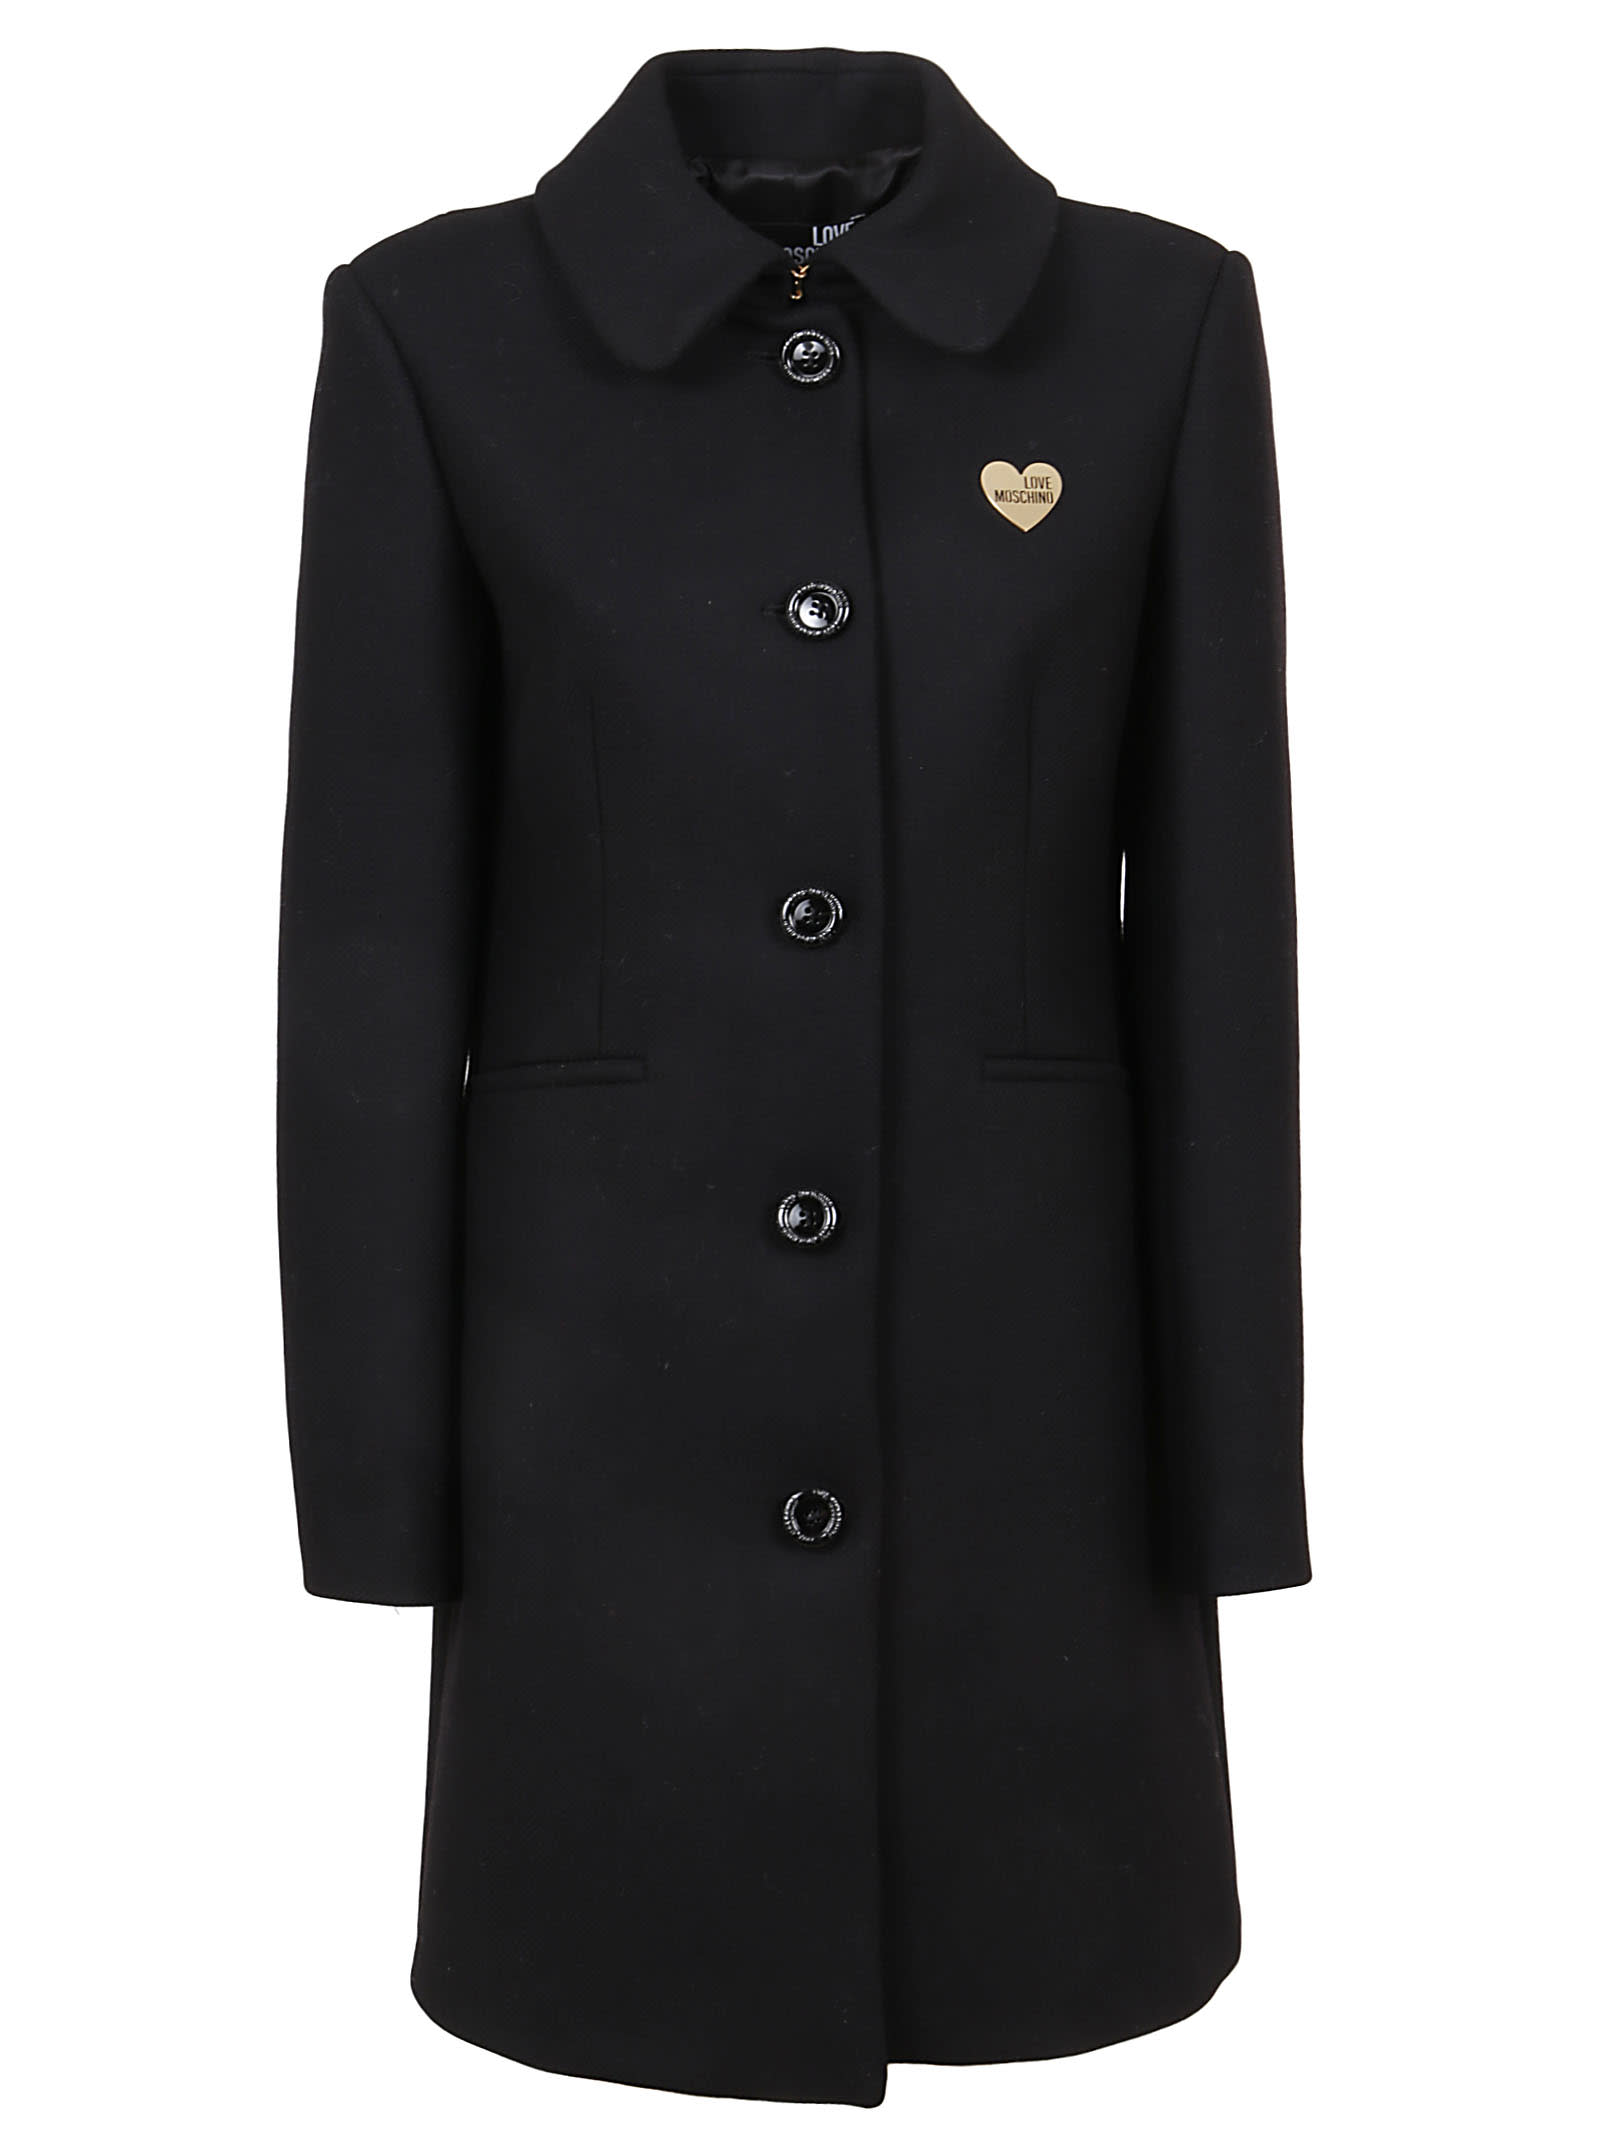 moschino black coat off 75% - online-sms.in